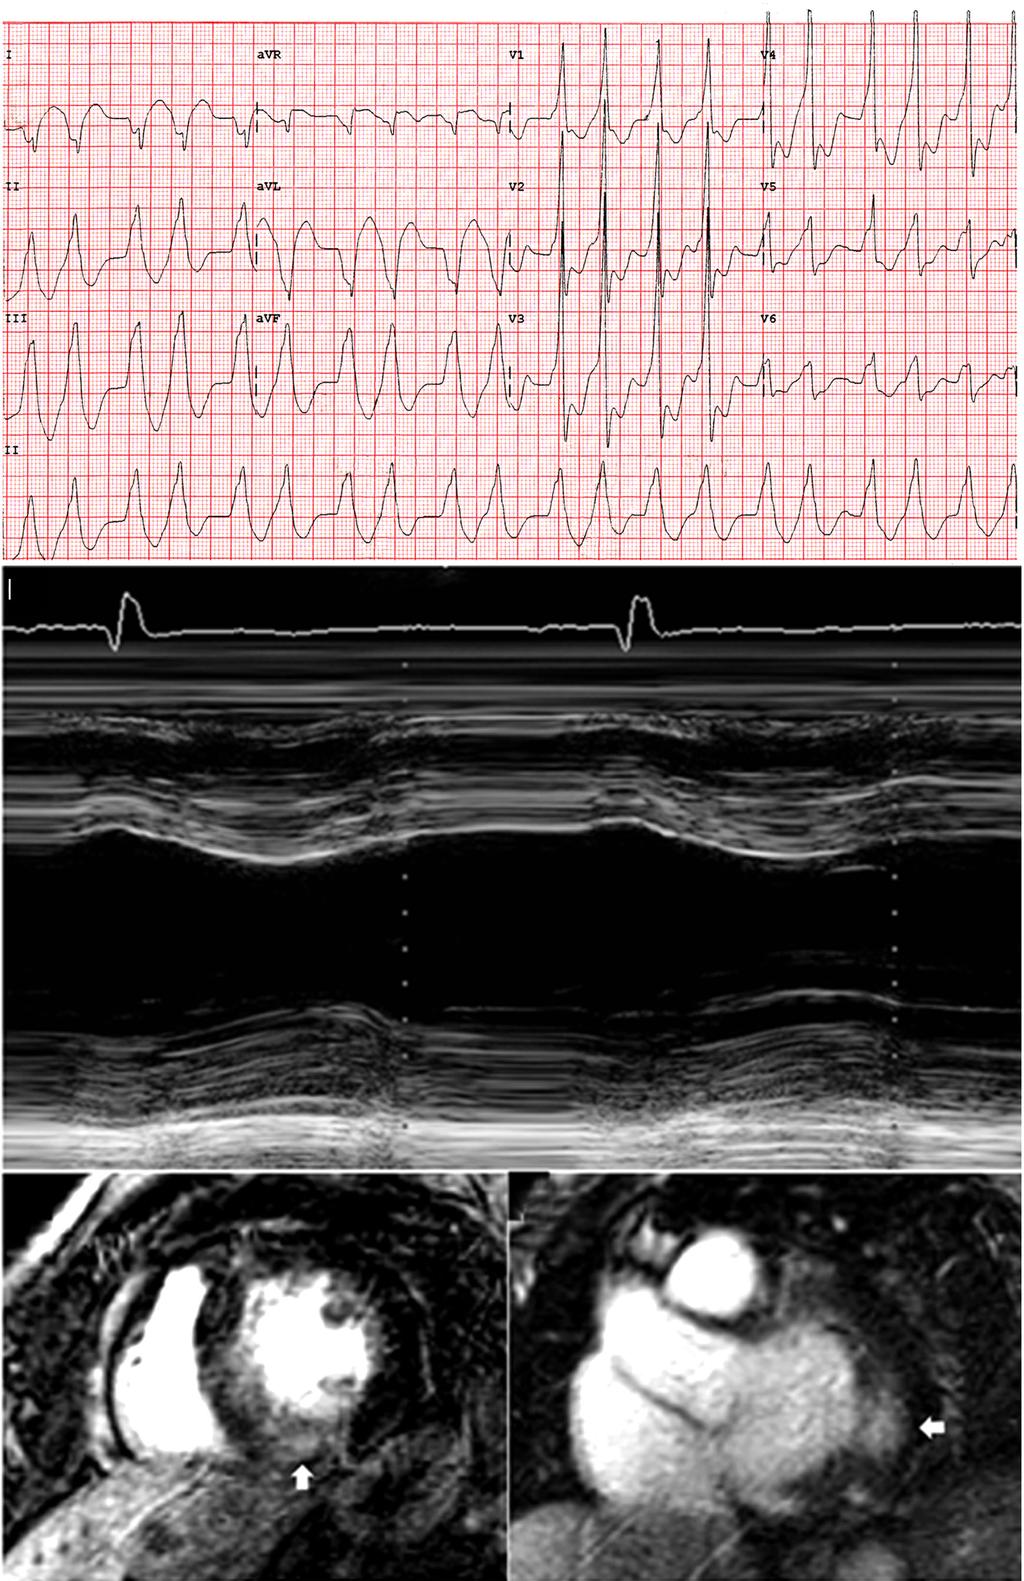 Chin-Yu Lin, et al. 527 A B C D Fig. 1. Electrocardiographic morphologies of ventricular arrhythmia and echocardiography in a patient with severe concentric left ventricular hypertrophy (LVH).